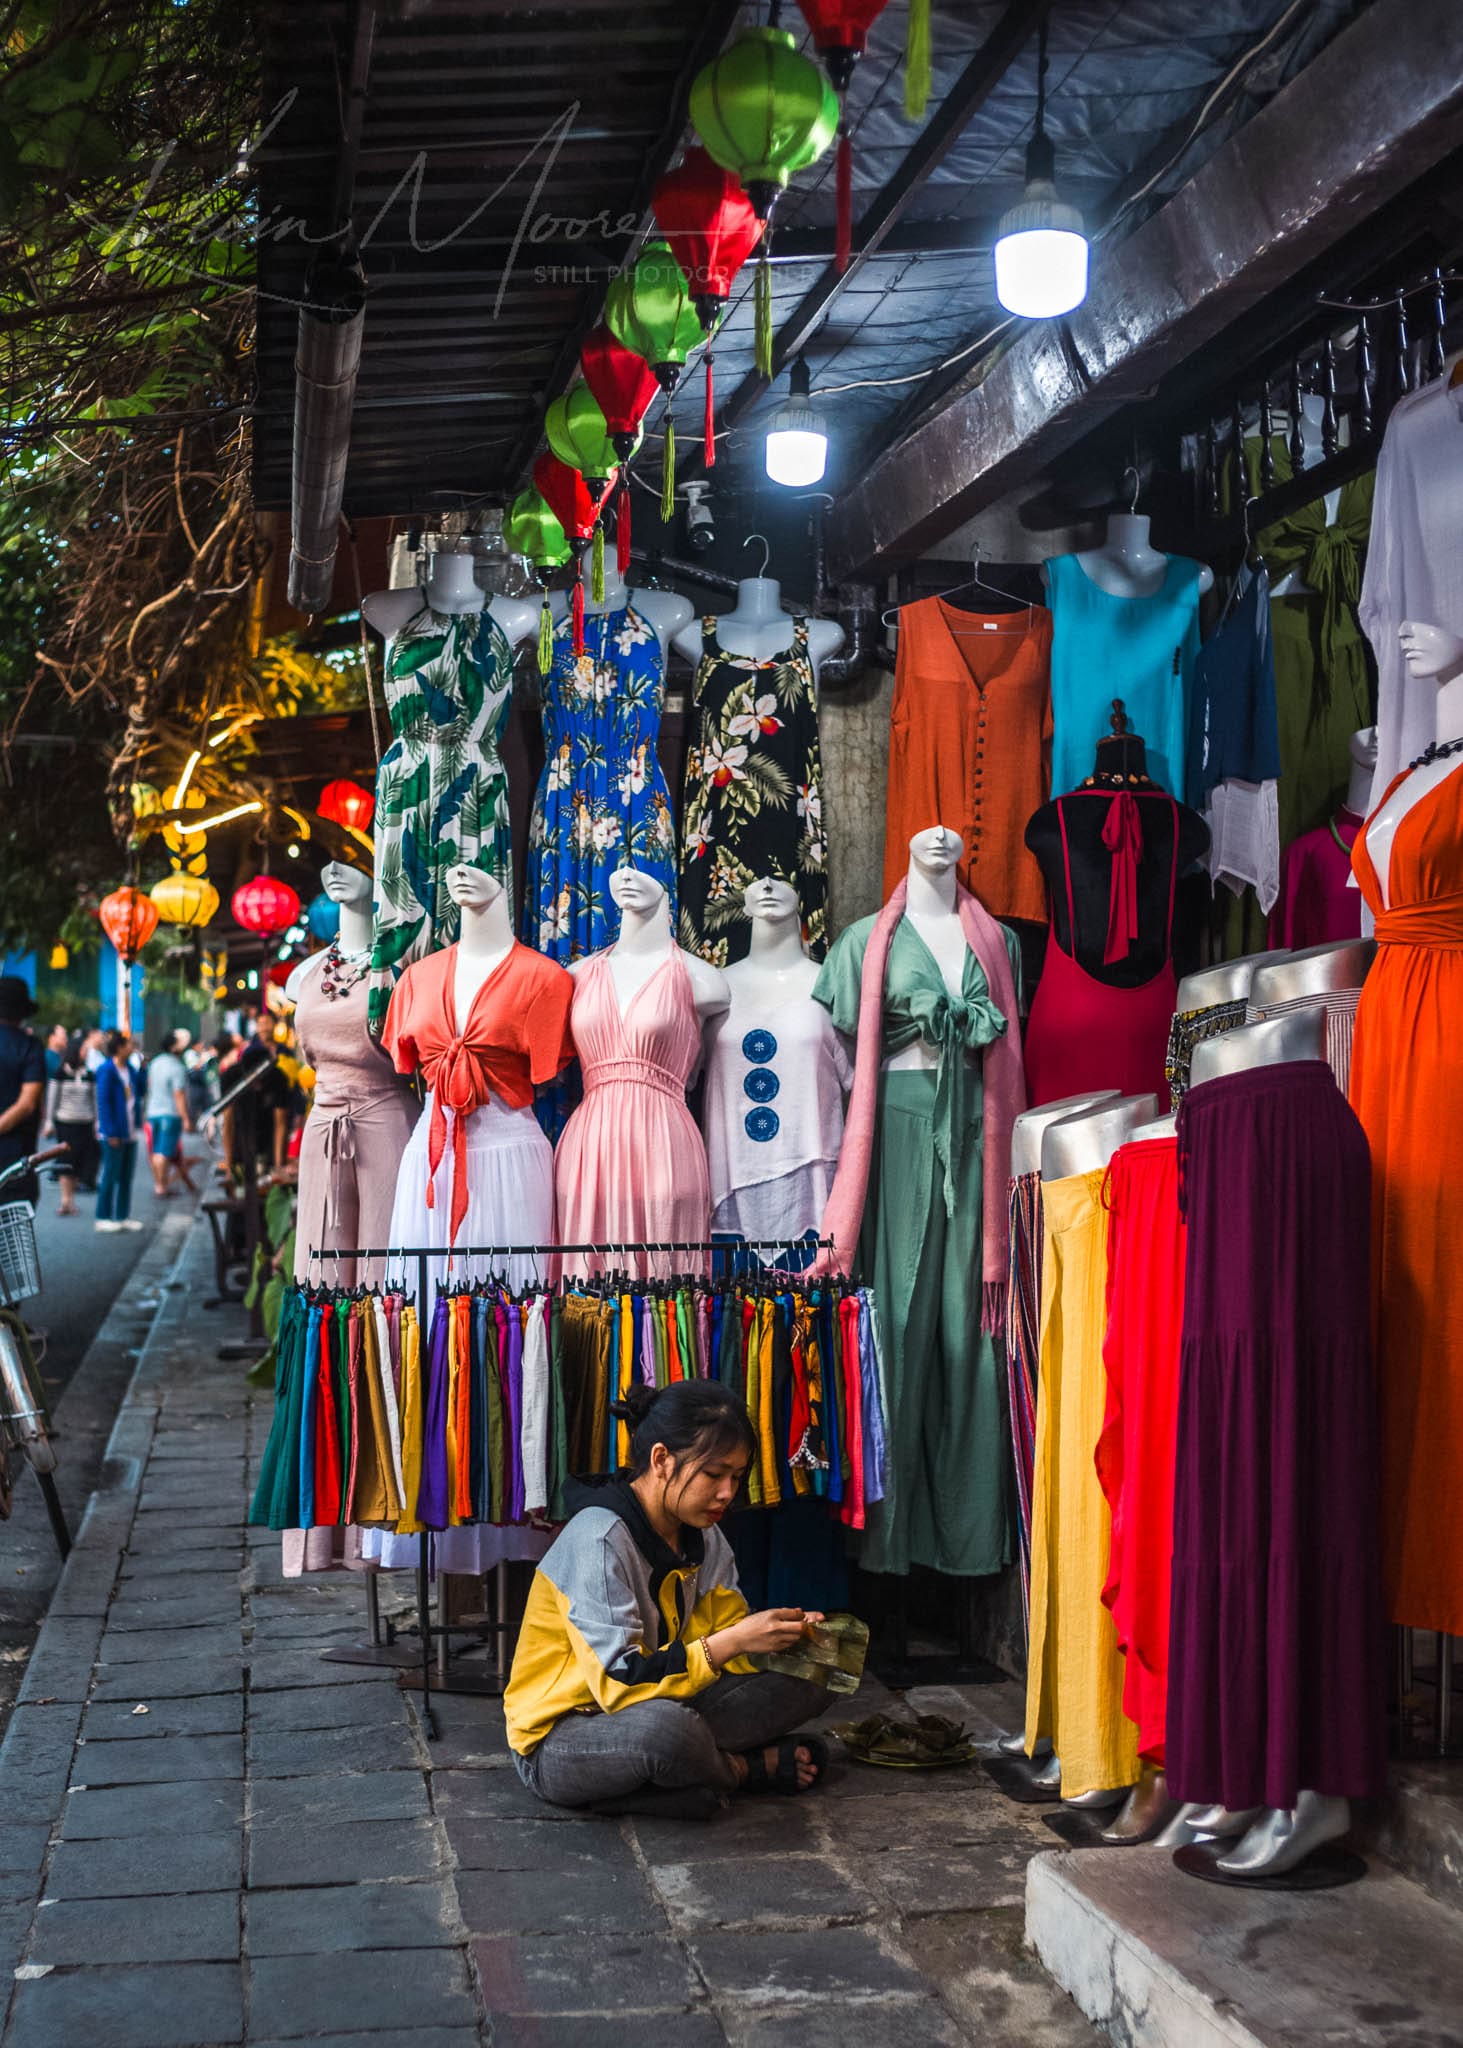 Colorful traditional dresses on mannequins in vibrant night market scene.